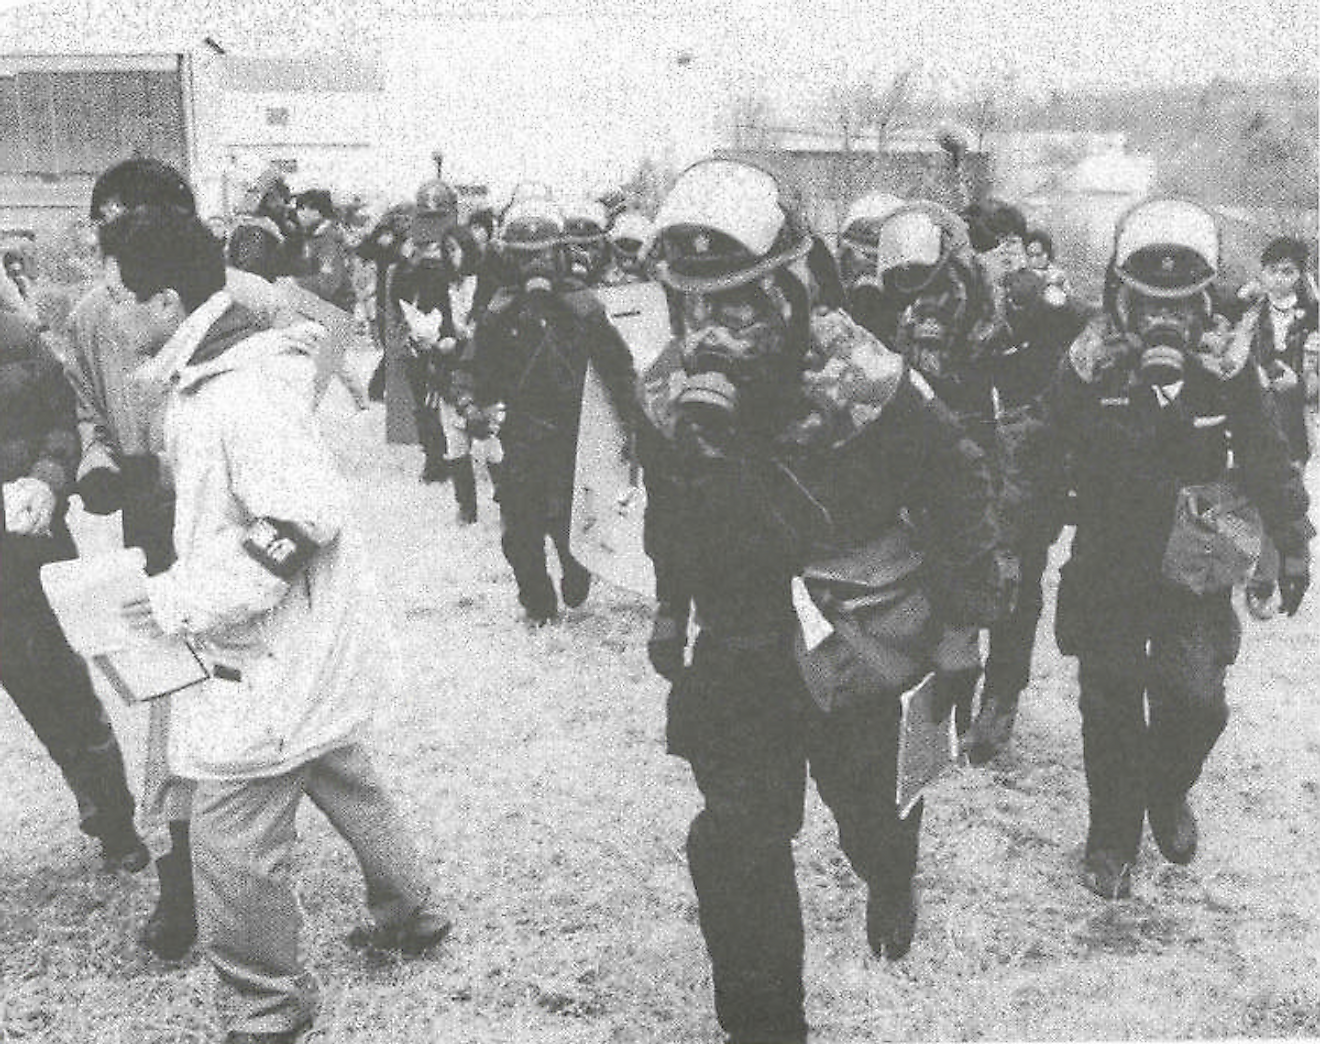 Emergency personnel respond to the Tokyo subway sarin attack. Image credit: United States Public Health Service/Public domain